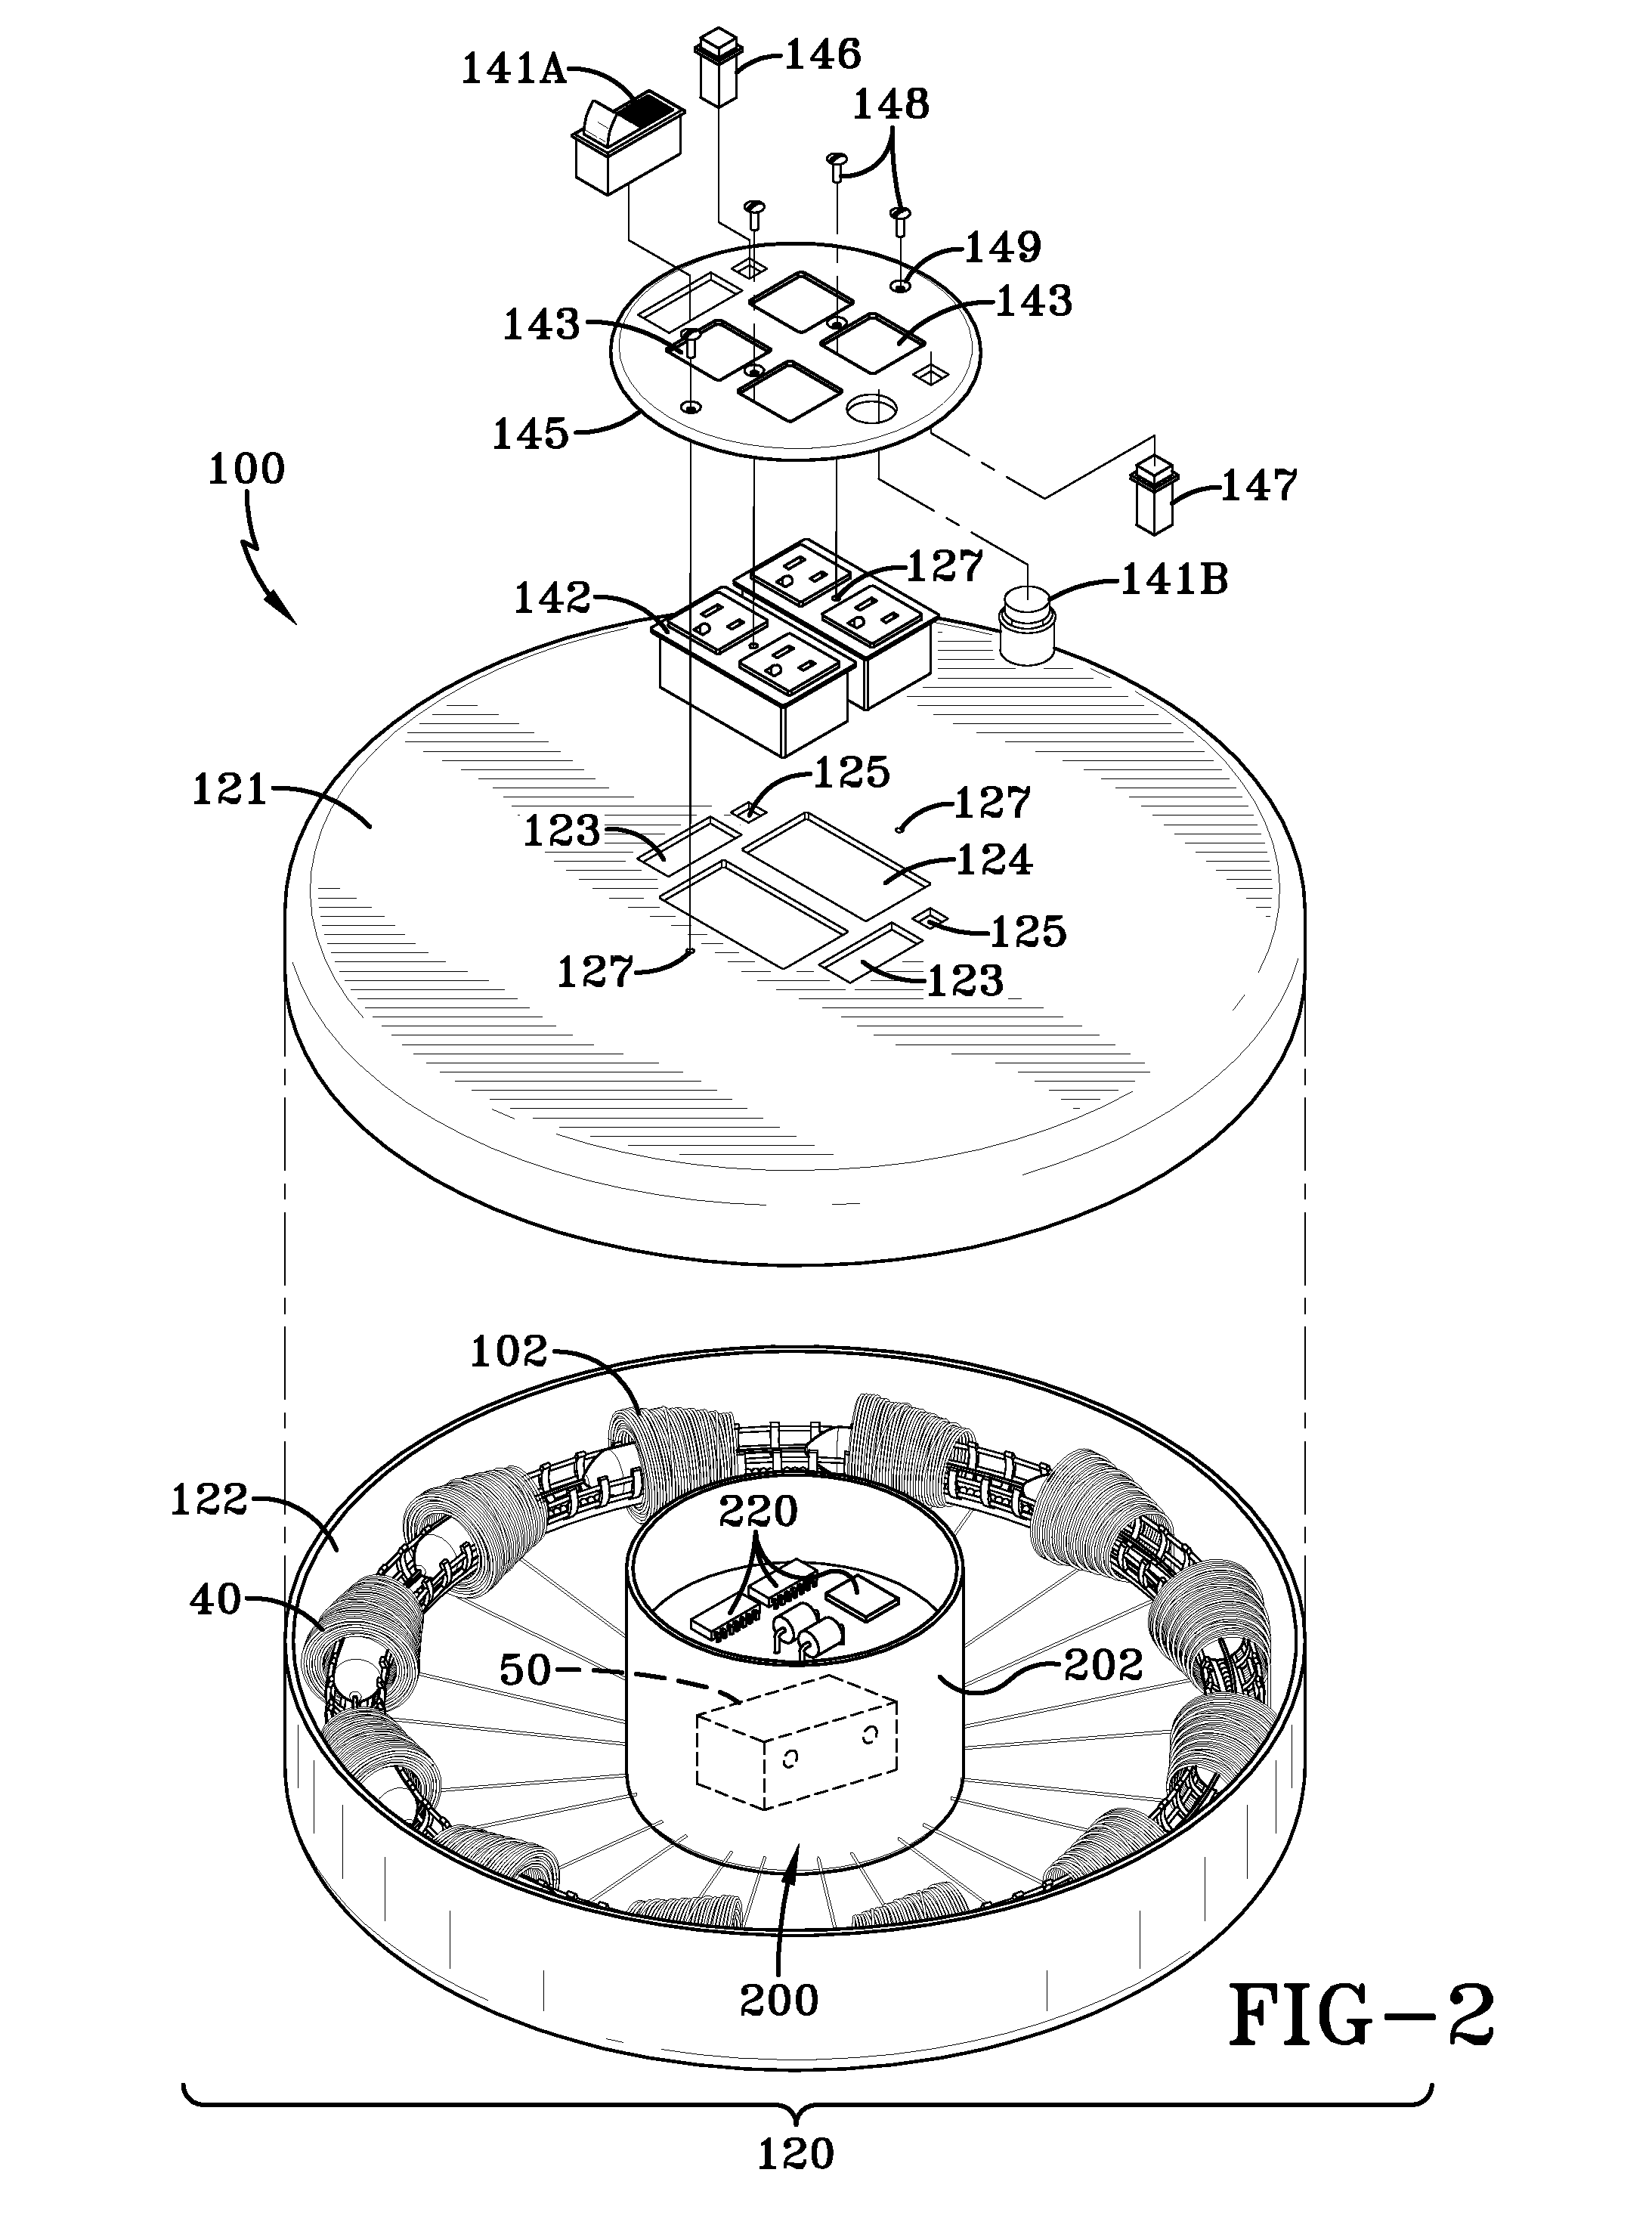 Gravity-assisted geomagnetic generator